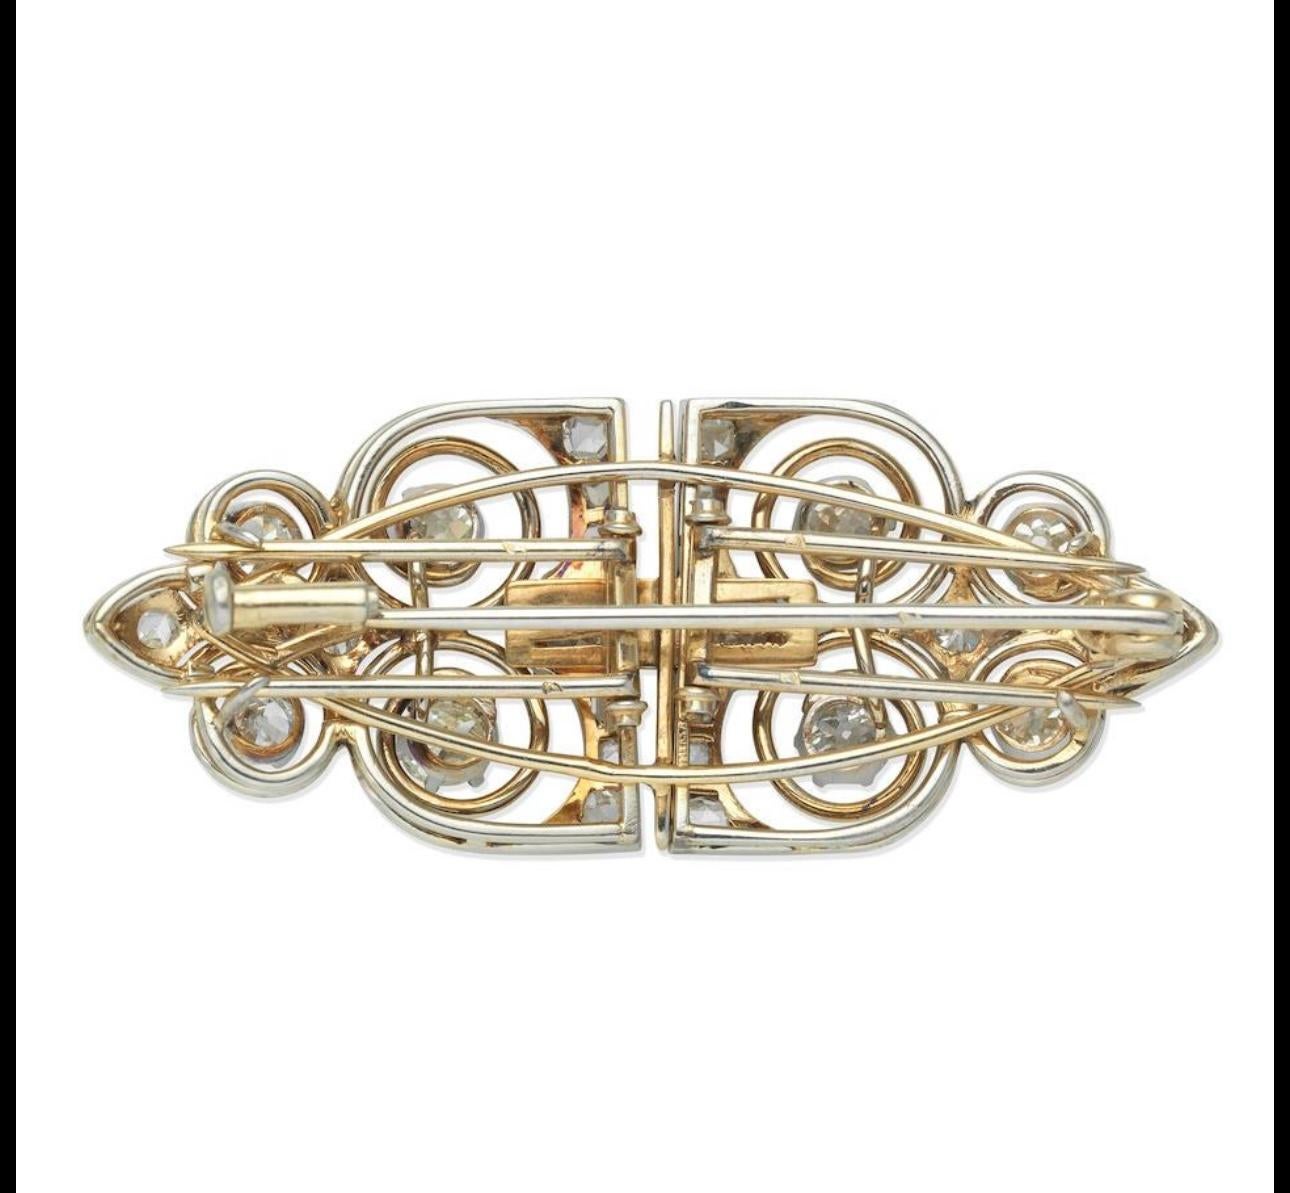 DIAMOND DOUBLE-CLIP BROOCH
Cushion-shaped and rose-cut diamonds
Cushion-shaped diamonds approx. 2.65cts total
French assay marks
Length 5.6cm
Weight approx. 18.5g
Footnotes:
French assay marks (owl) partially struck to pin and clip fittings.